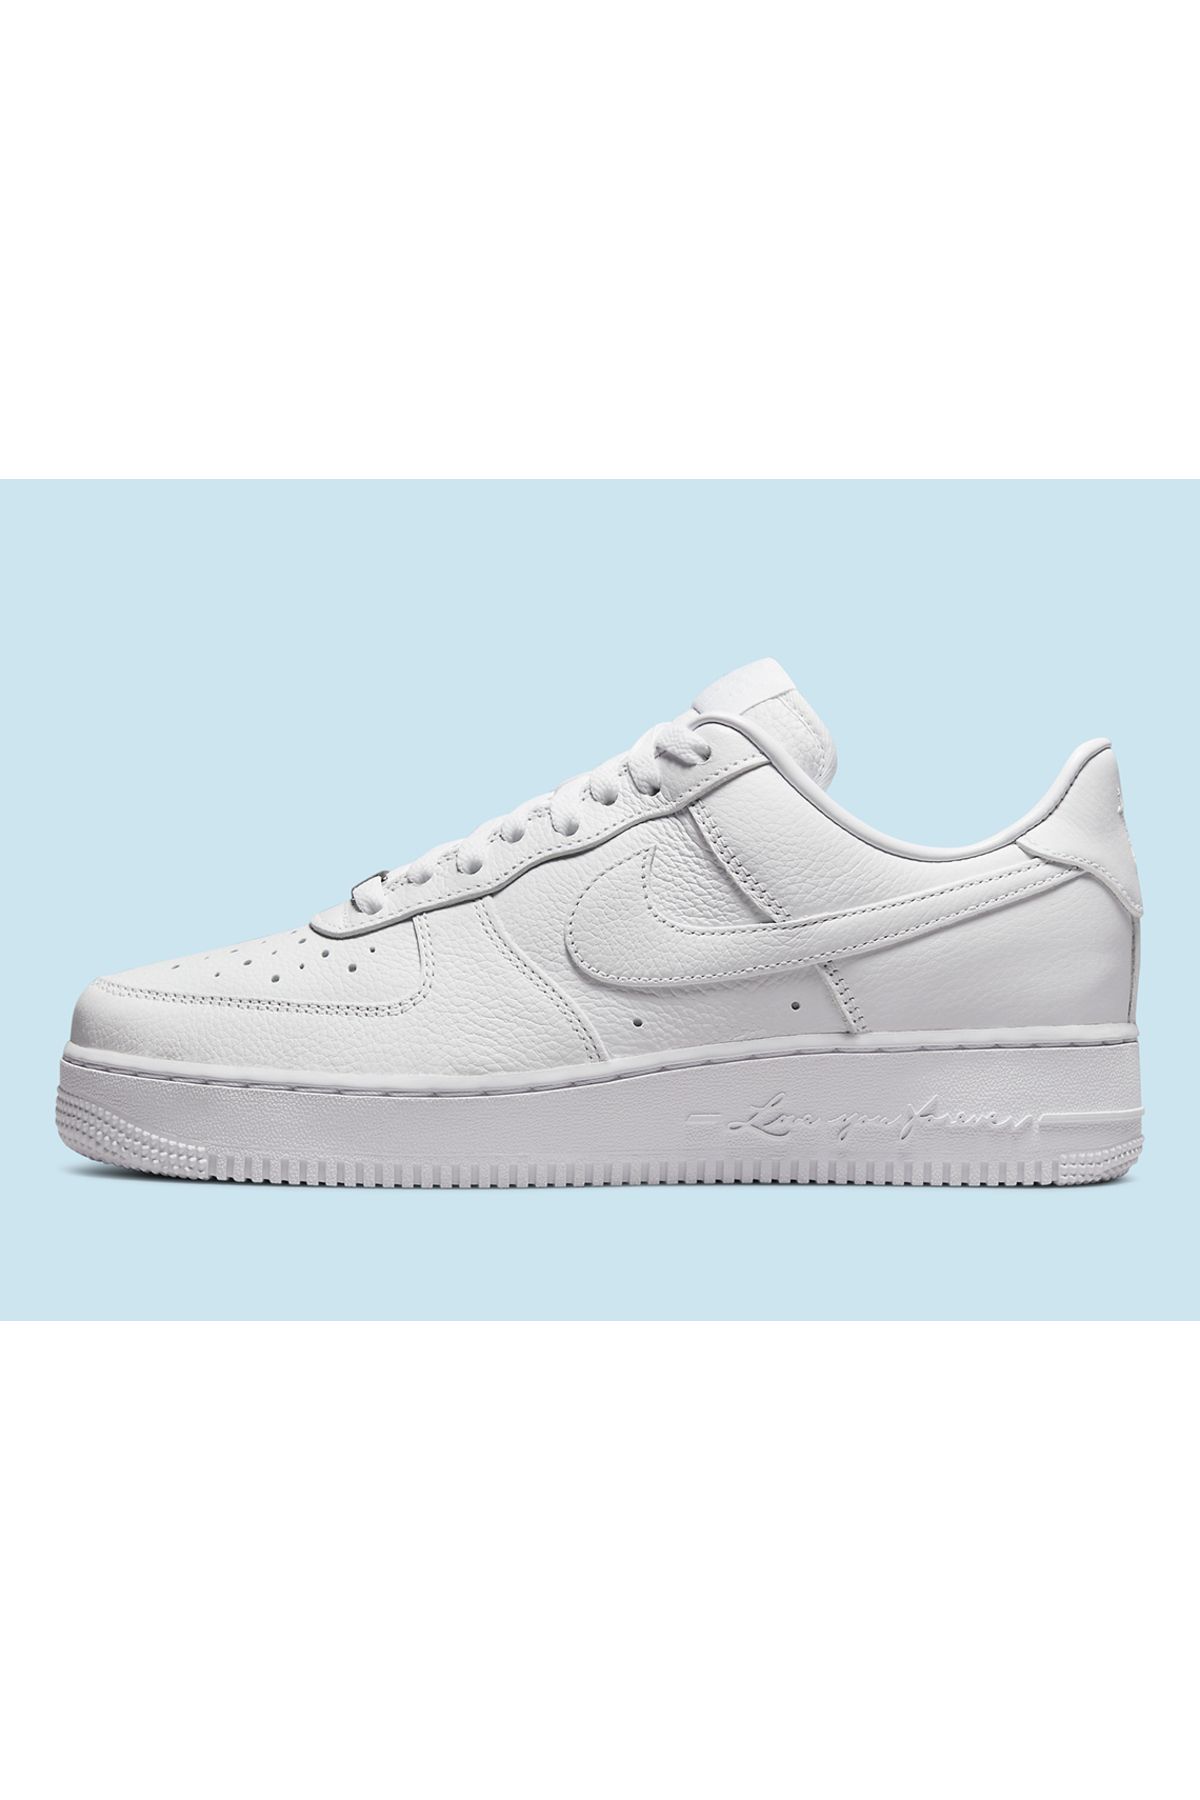 Nike NOCTA x Air Force 1 Low 'Certified Lover Boy'